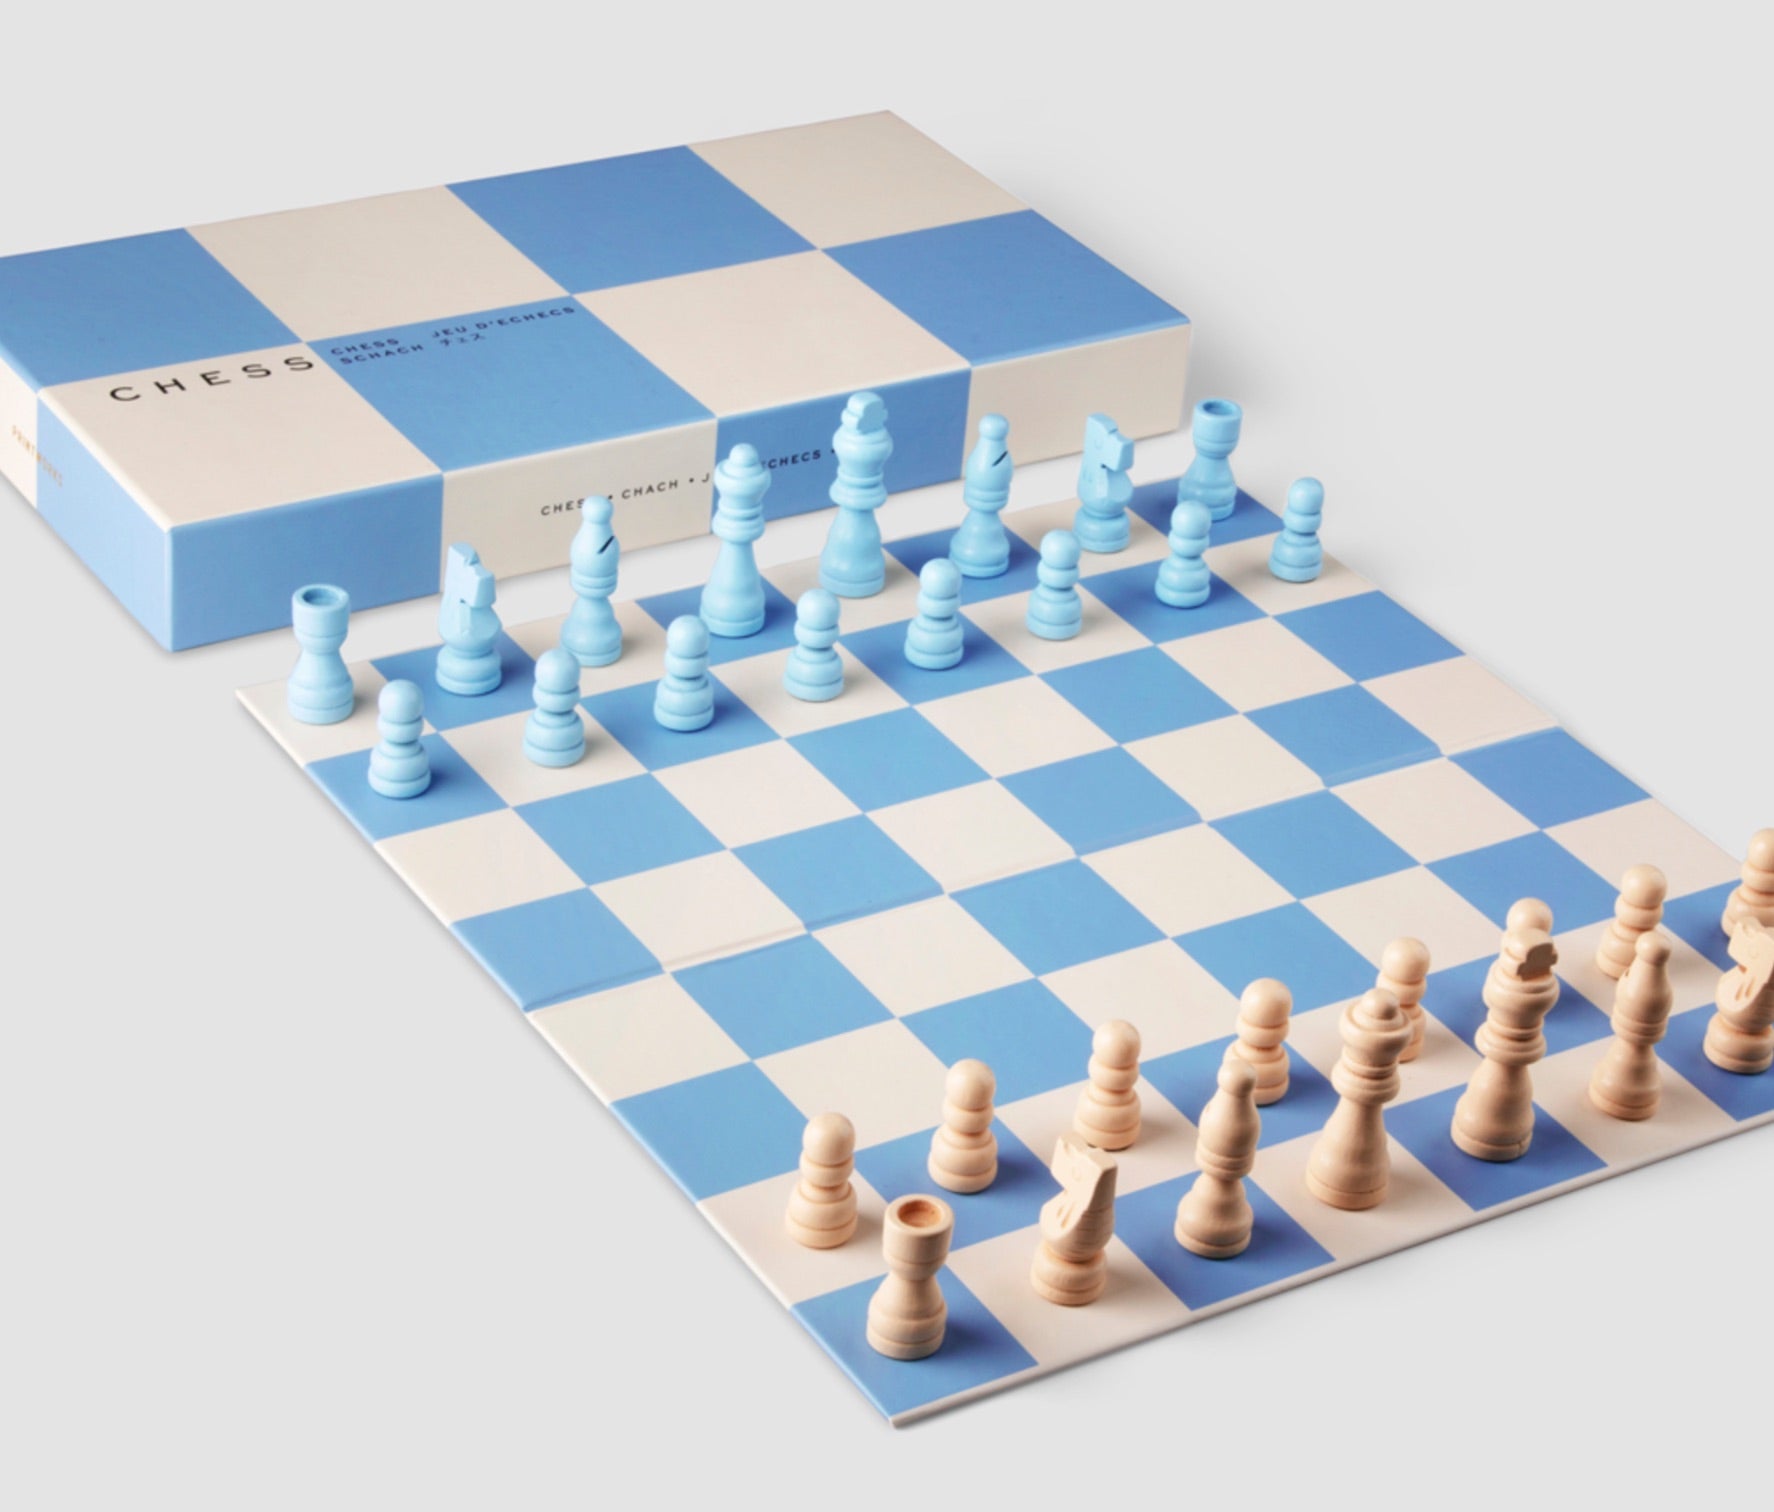 Classic Game - Chess